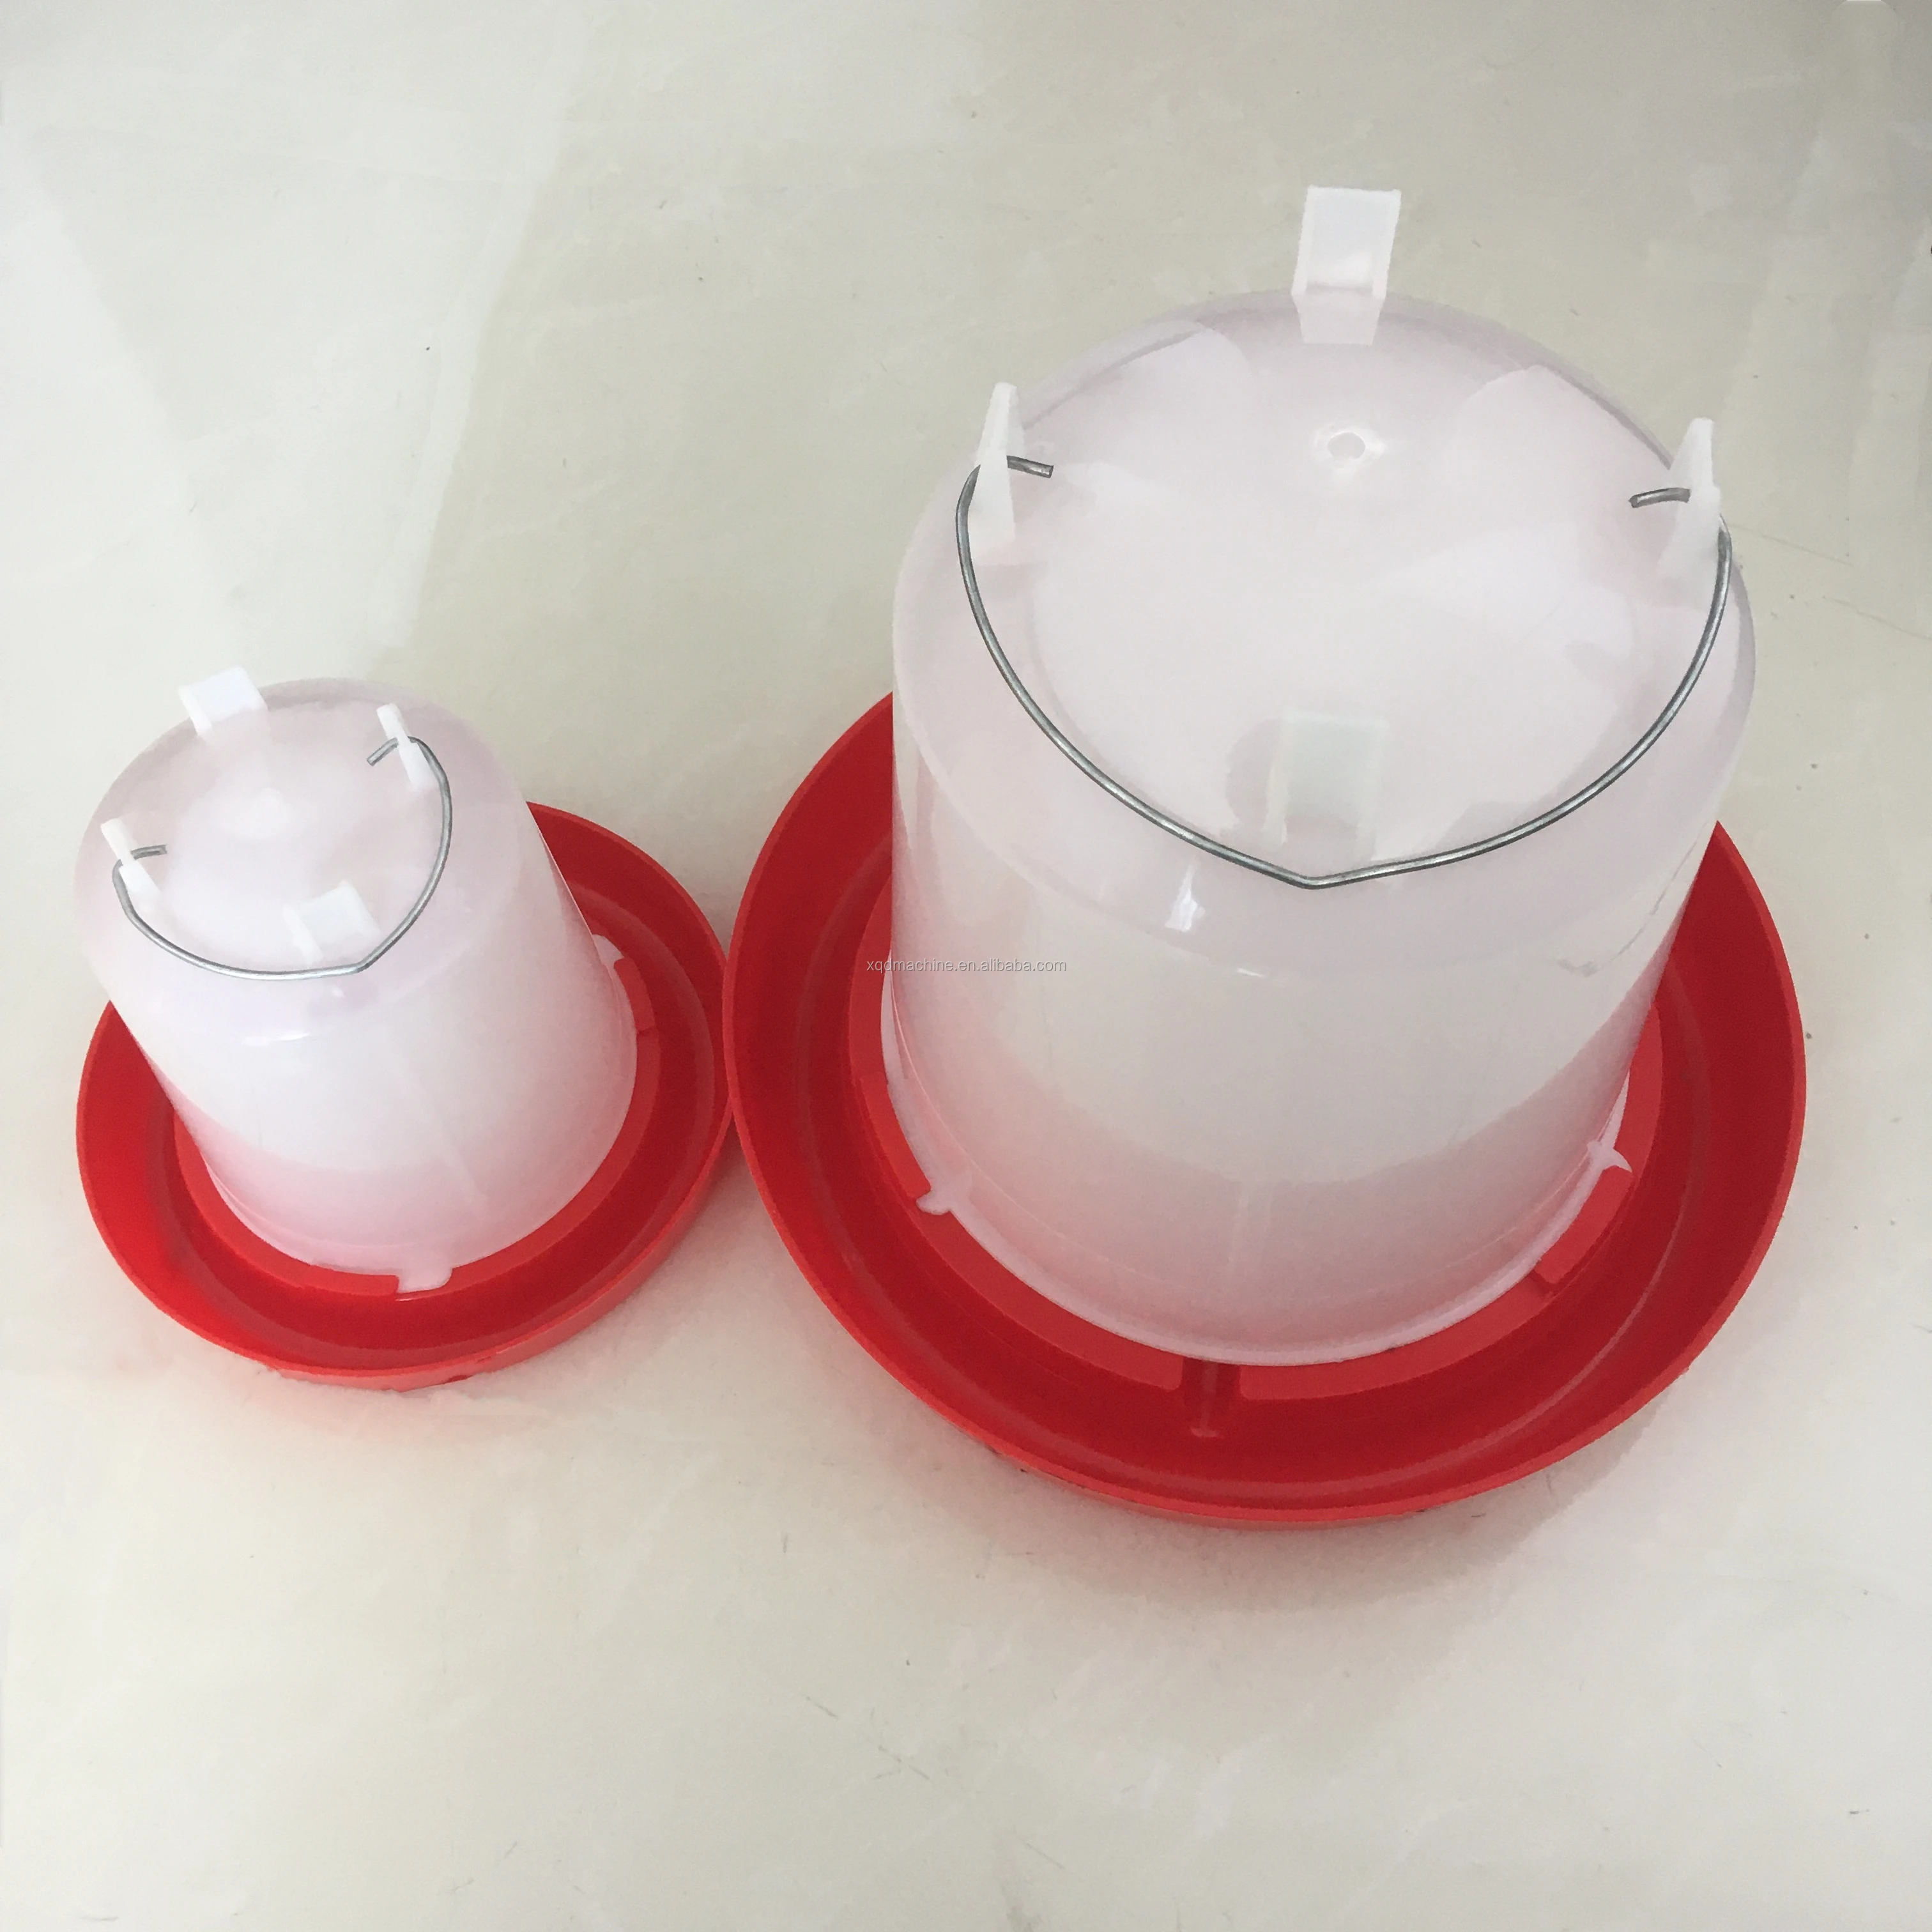 Amazon hot selling Poultry Broiler Hens Birds Bucket Drinkers and Feeder for Farming Equipment